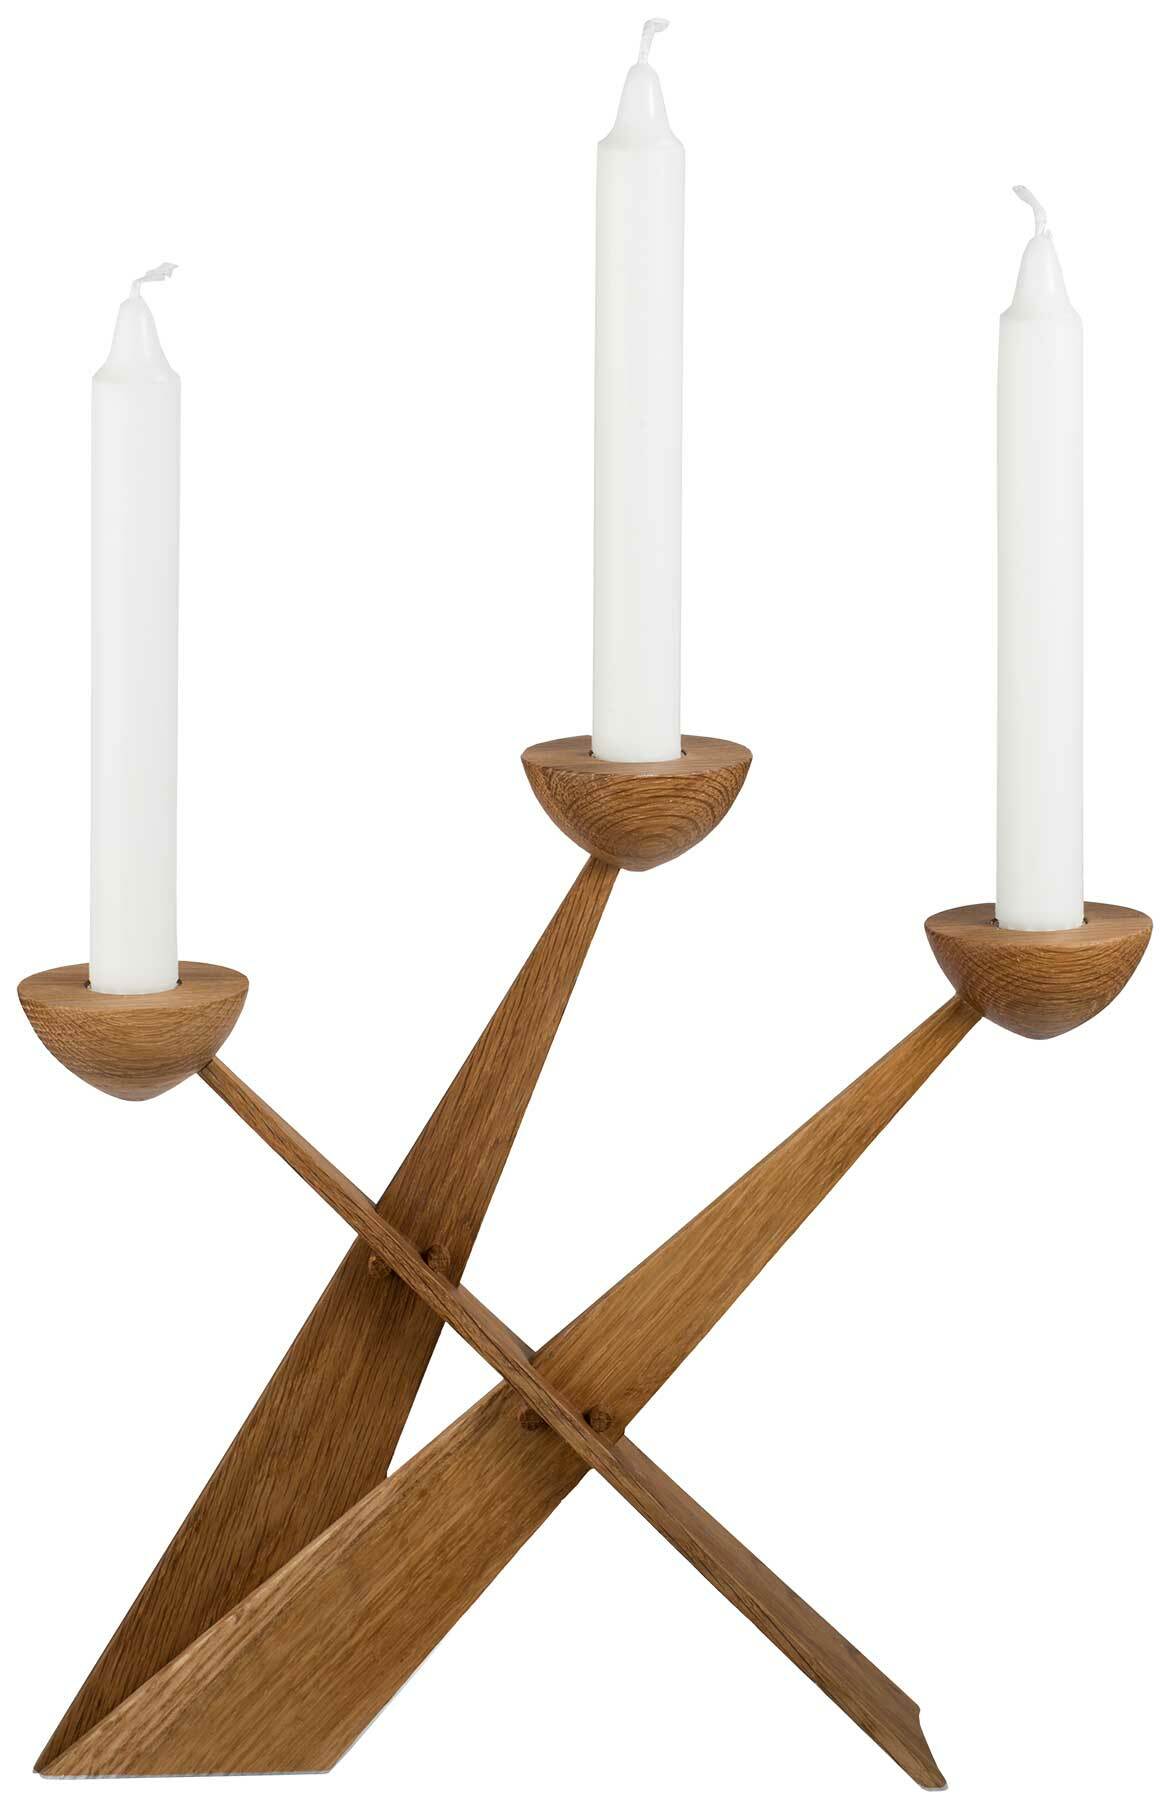 Candlestick "Candletree" (without candles), oak wood version by Spring Copenhagen